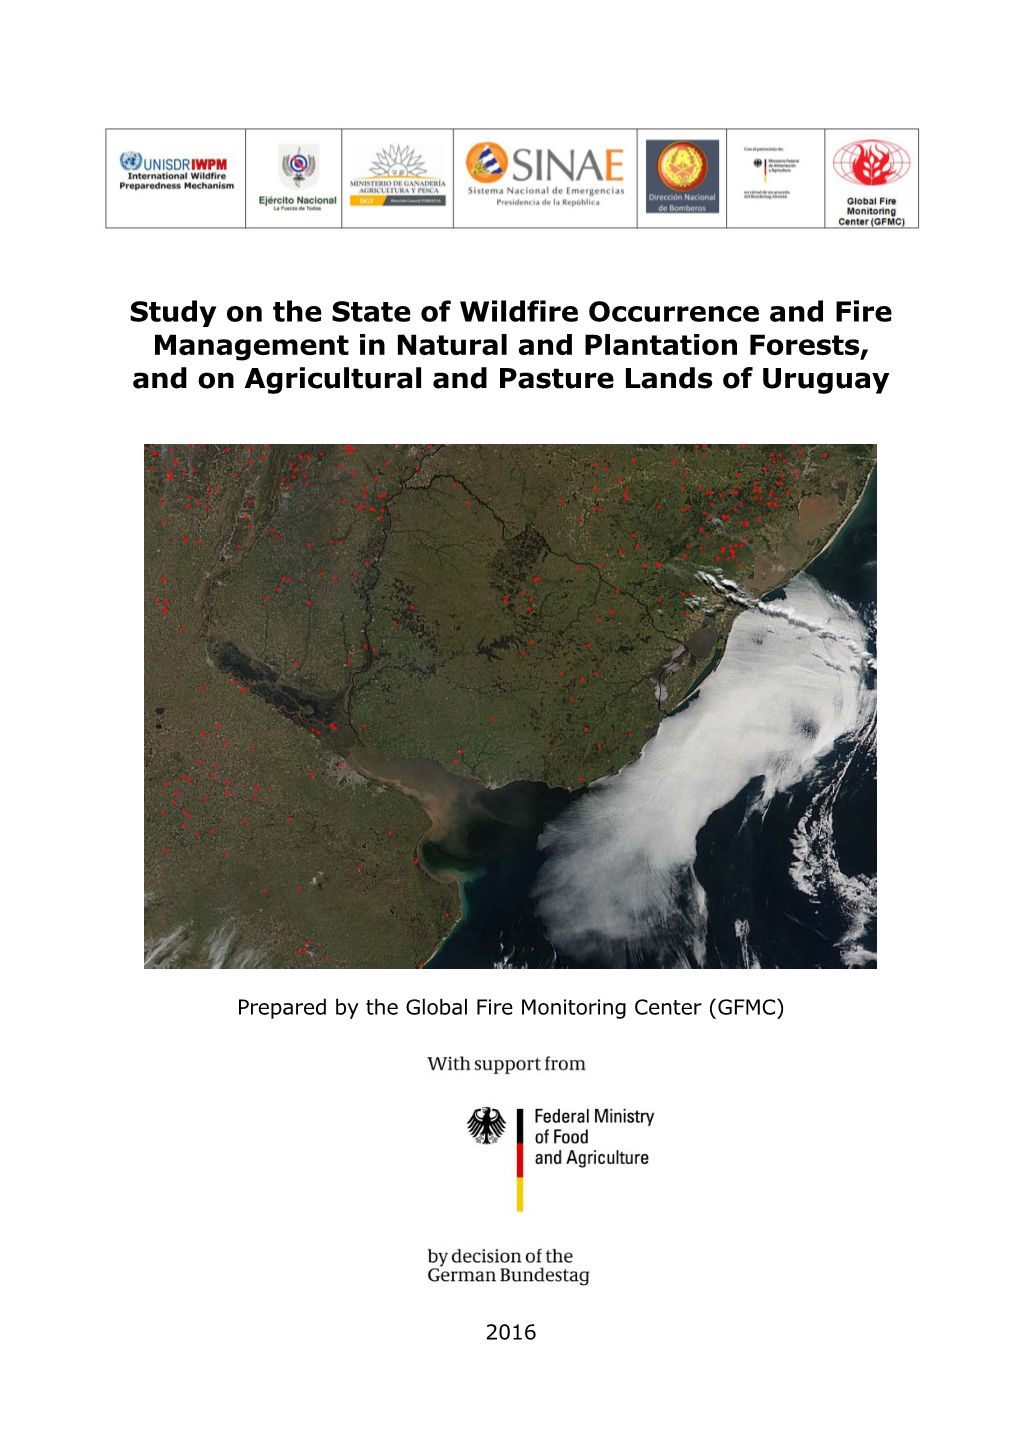 Tudy on the State of Wildfire Occurrence and Fire Management in Natural and Plantation Forests, and on Agricultural and Pasture Lands of Uruguay